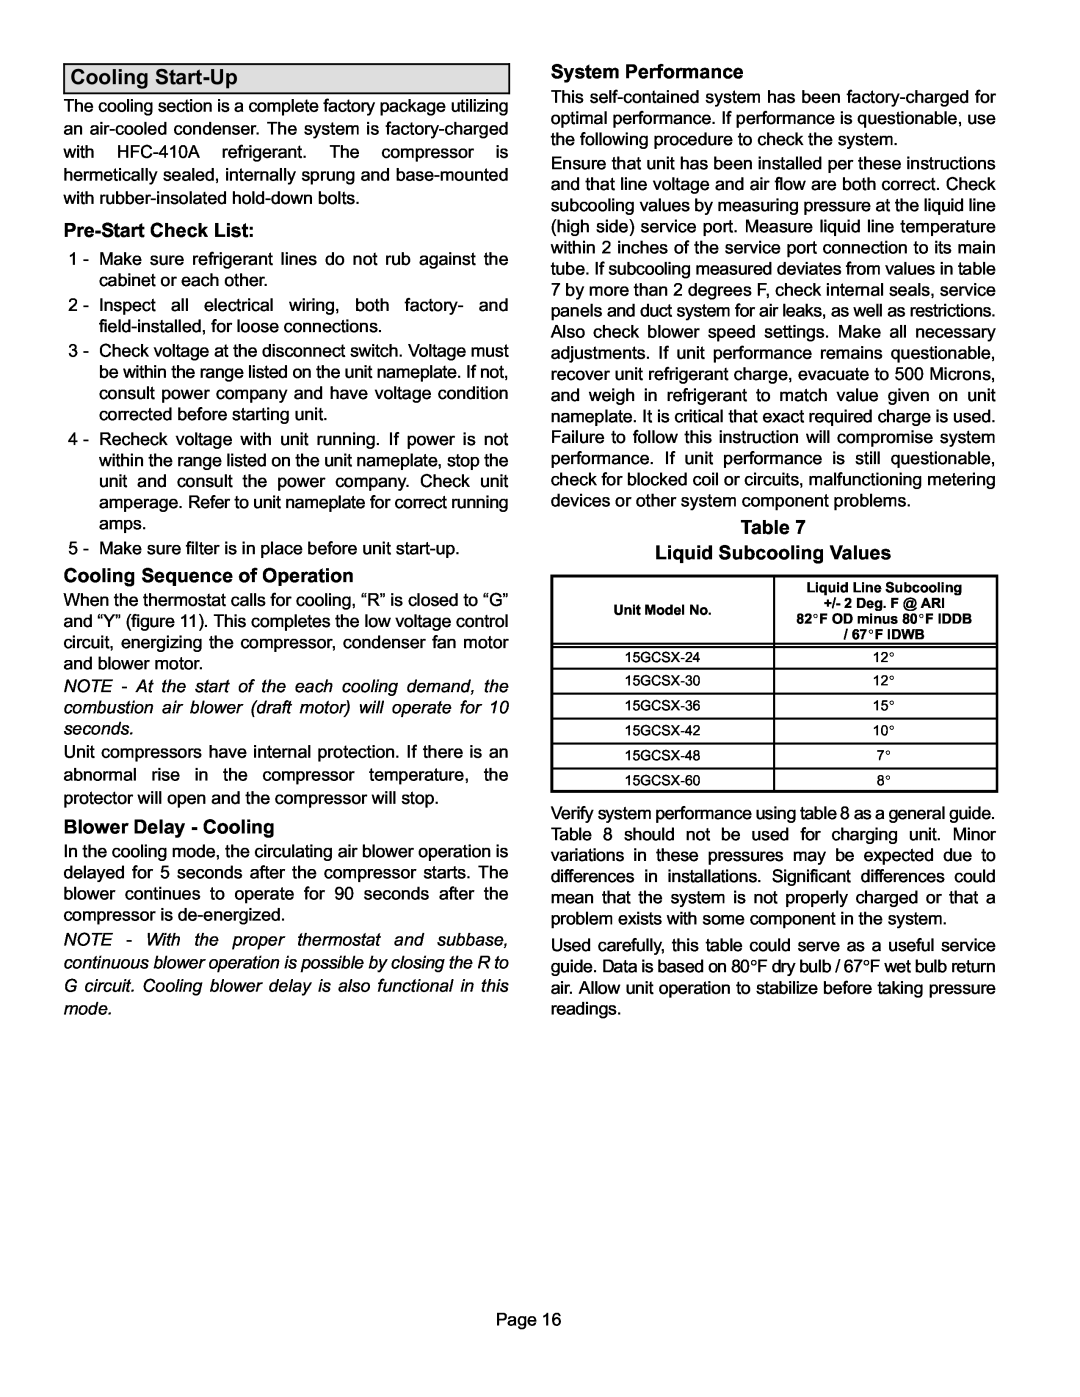 Lennox International Inc 15GCSX Pre−Start Check List, Cooling Sequence of Operation, Blower Delay − Cooling 